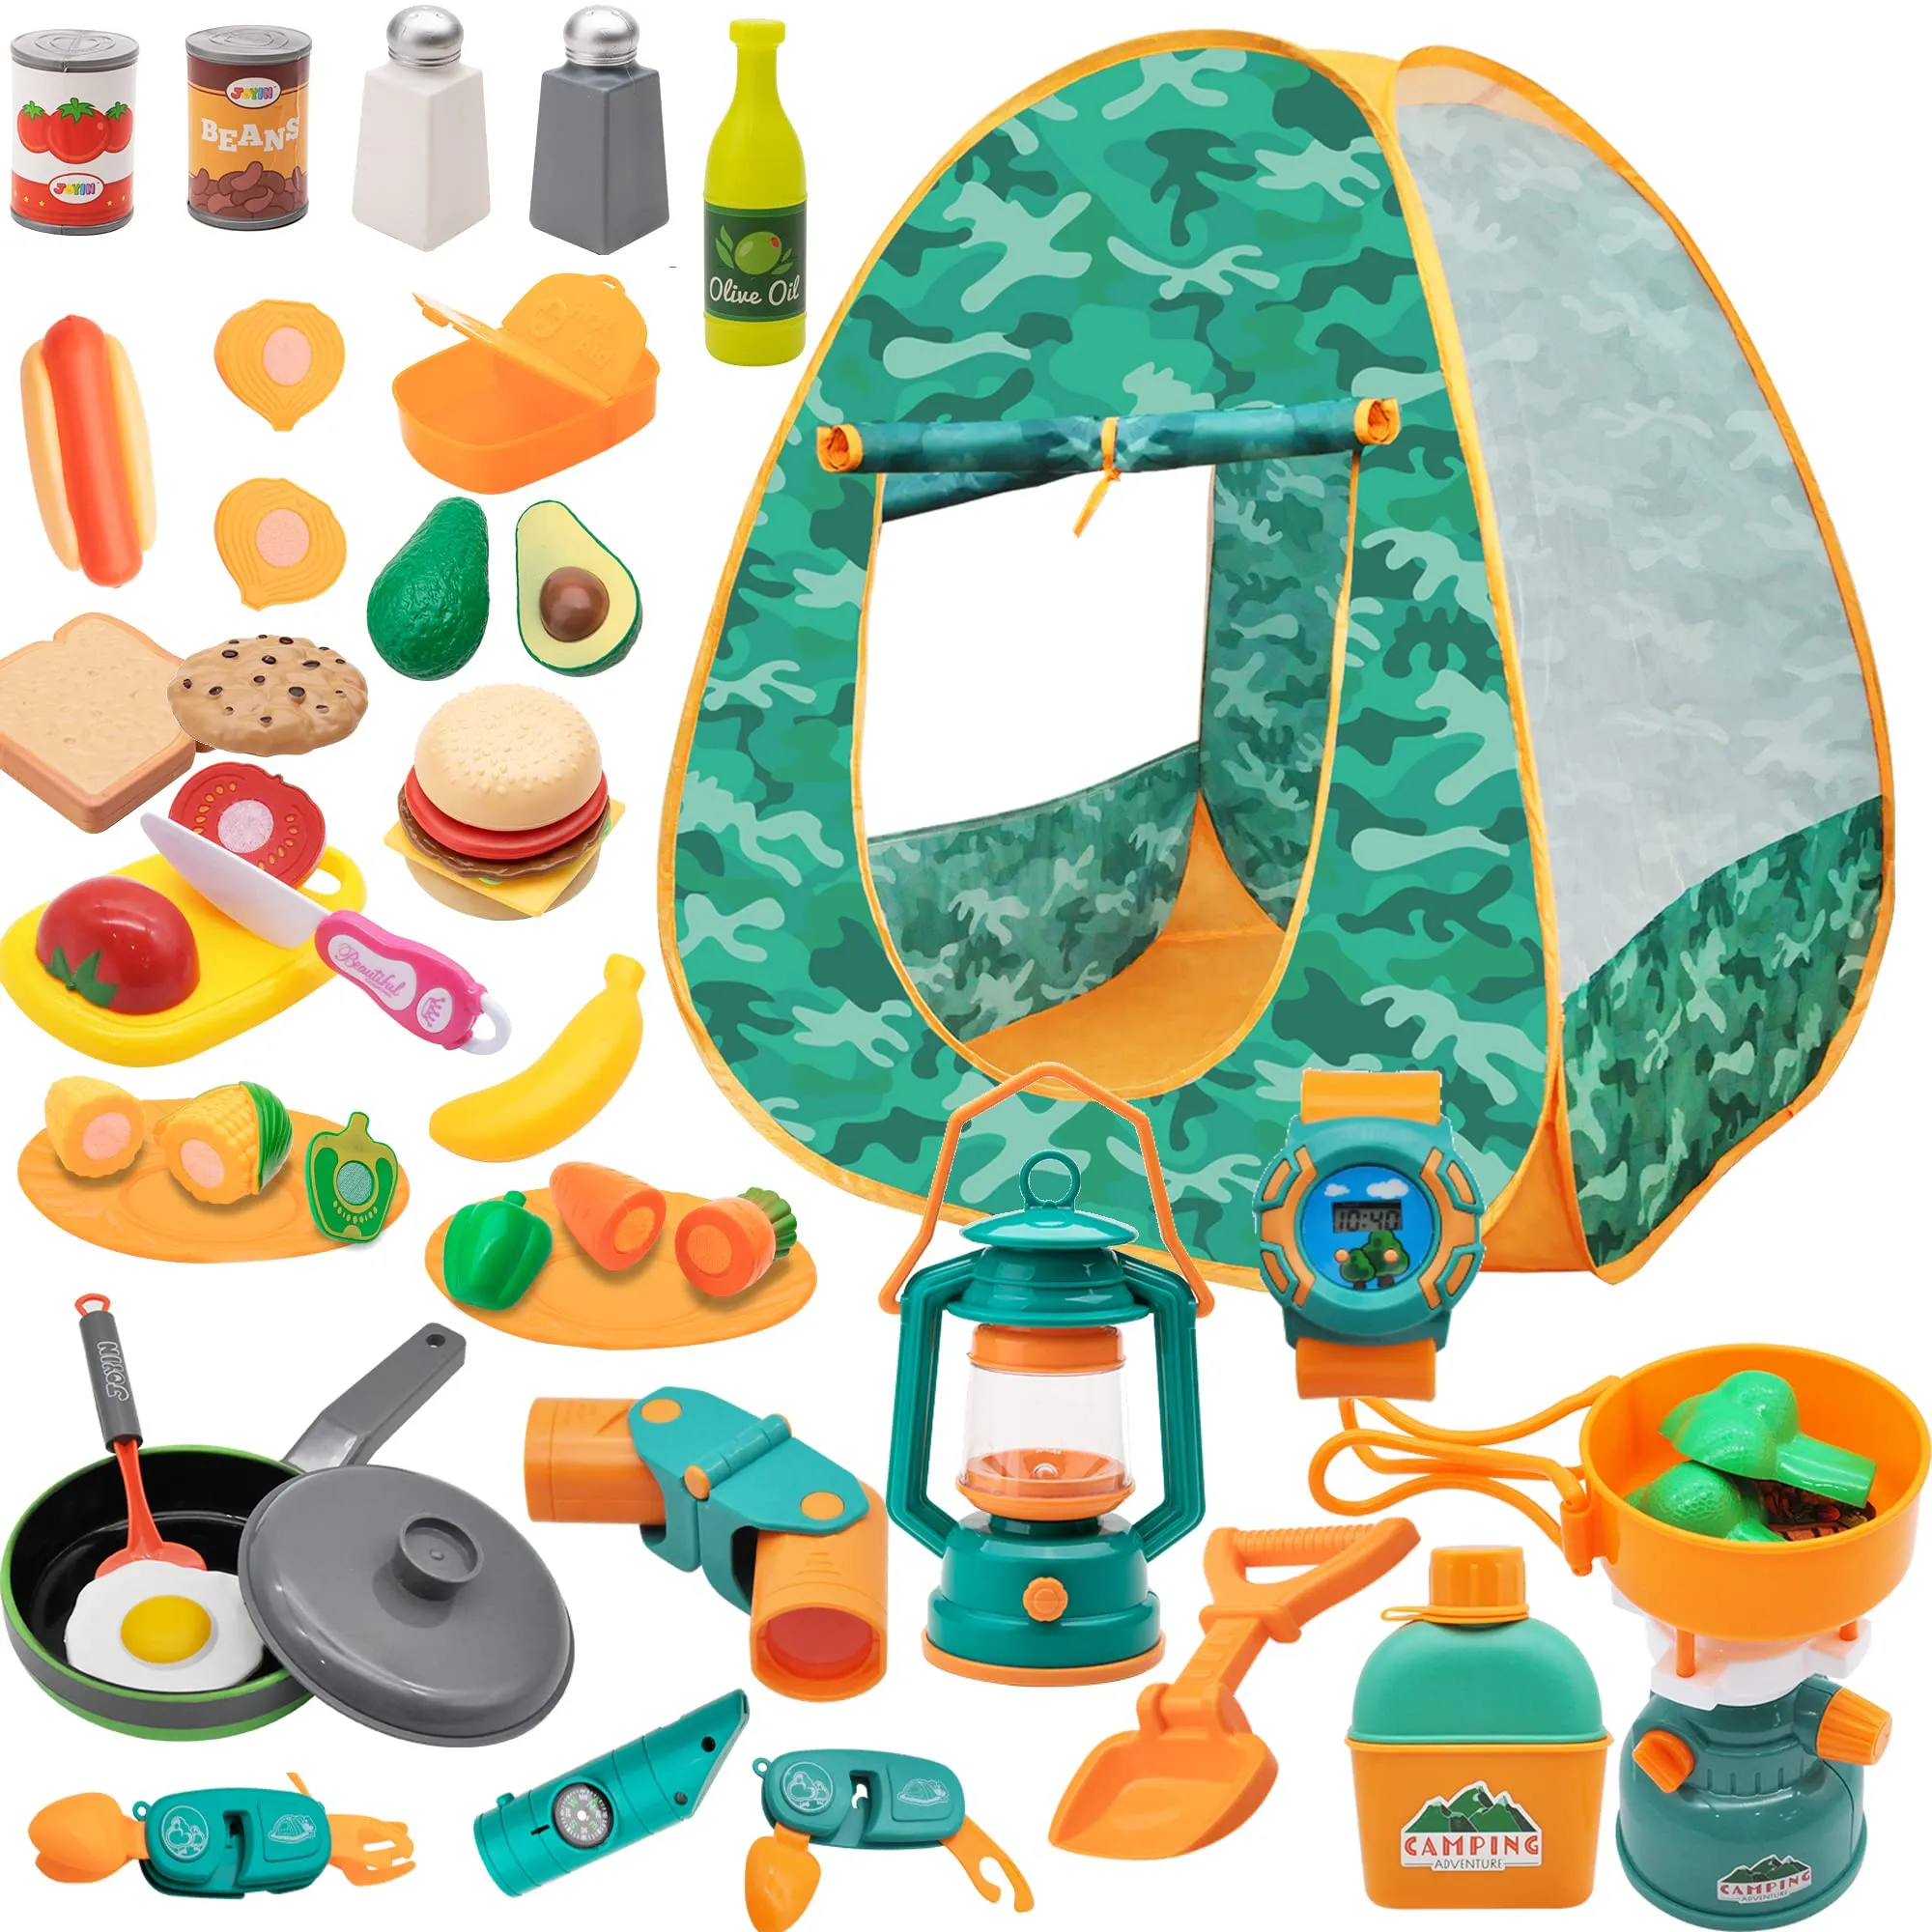 JOYIN 41Pcs Kids Camping Tent Set with Kids Camping Gear, Camping Set  Includes Kids Tent, Oil Lantern, Food Toys, Binoculars, Flashlights,  Compass and More, Pretend Play Camp Gear Tools for Christmas